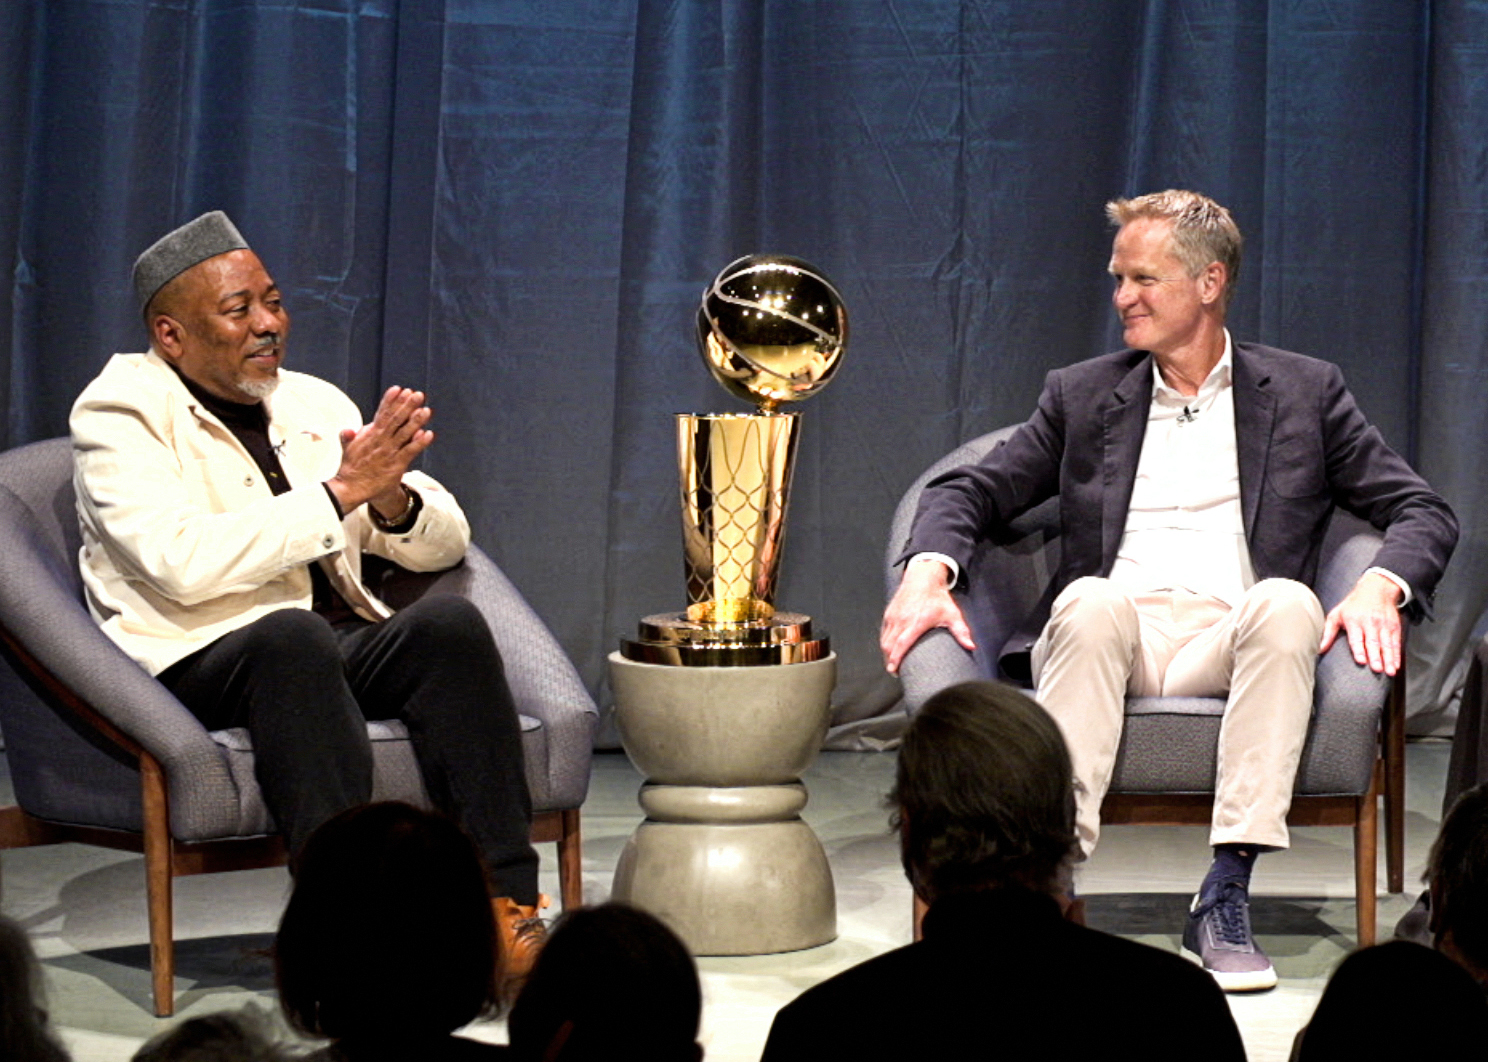 Alonzo King and Steve Kerr sit in gray-blue armchairs onstage during a public interview. Between them on a small table is a large gold NBA Championship trophy. King wears a short, light-colored jacket and black pants and a gray hat, and clasps his hands together in front of his chest. Kerr, on the right, wears a dark sport coat, white button-down shirt, khaki pants and blue tennis shoes, and looks toward King with a smile.